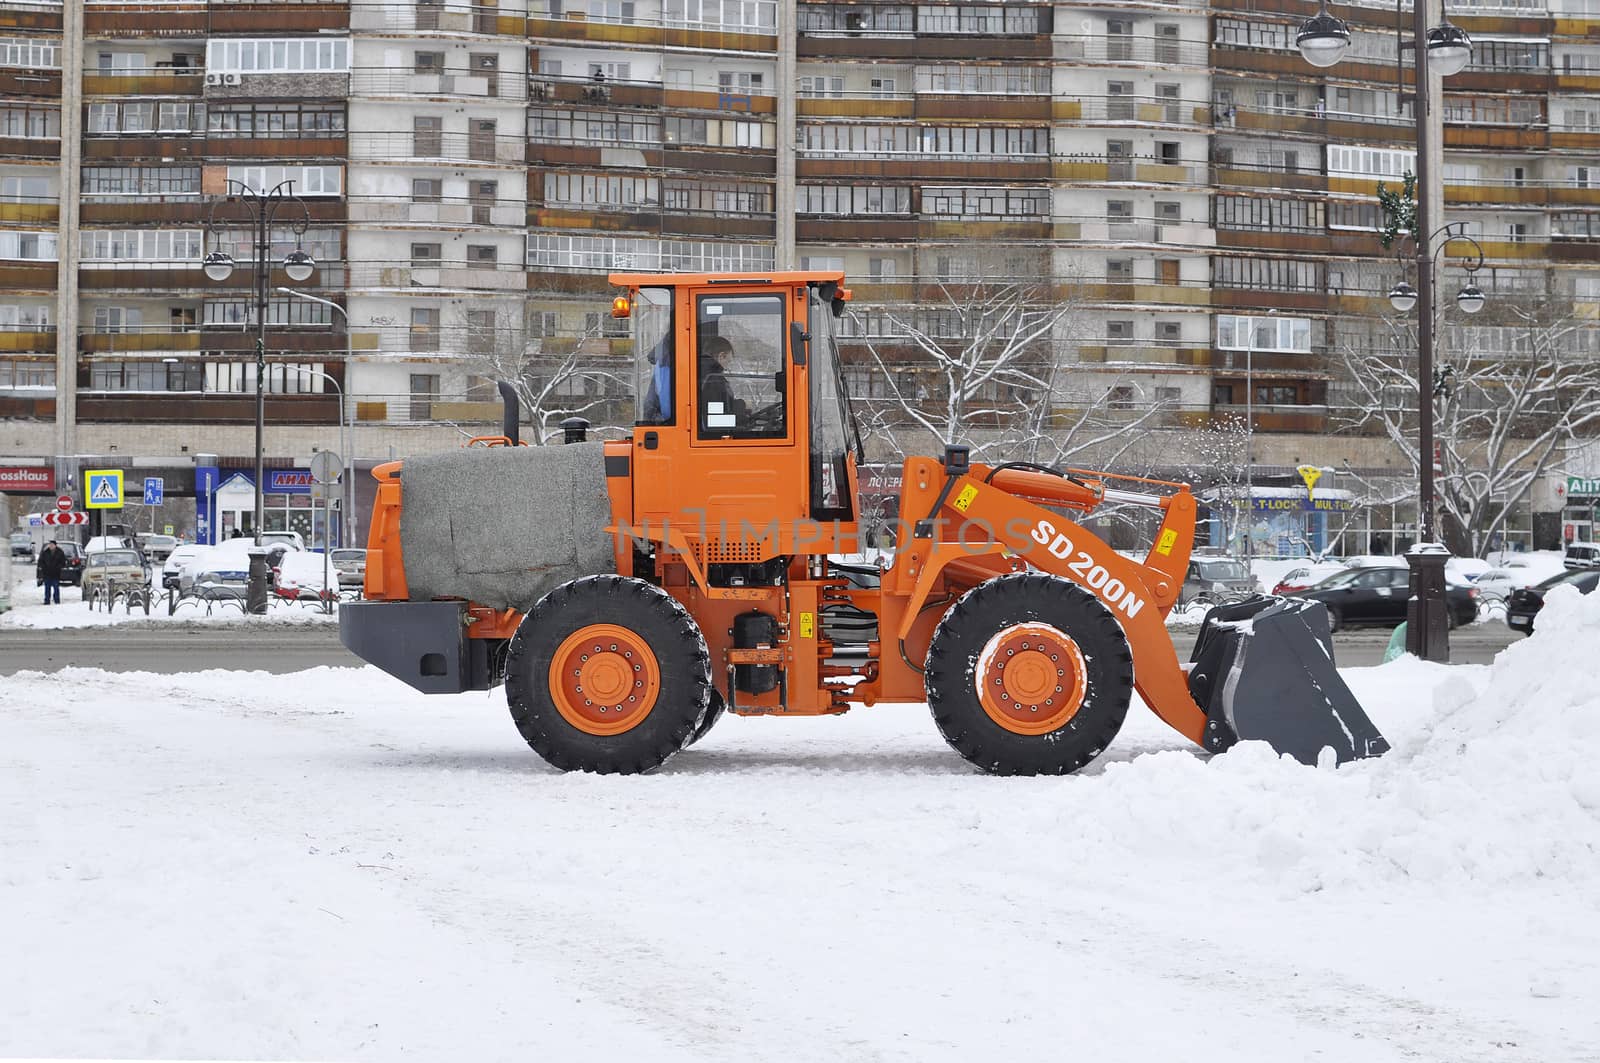 Cleaning of snow by means of special equipment